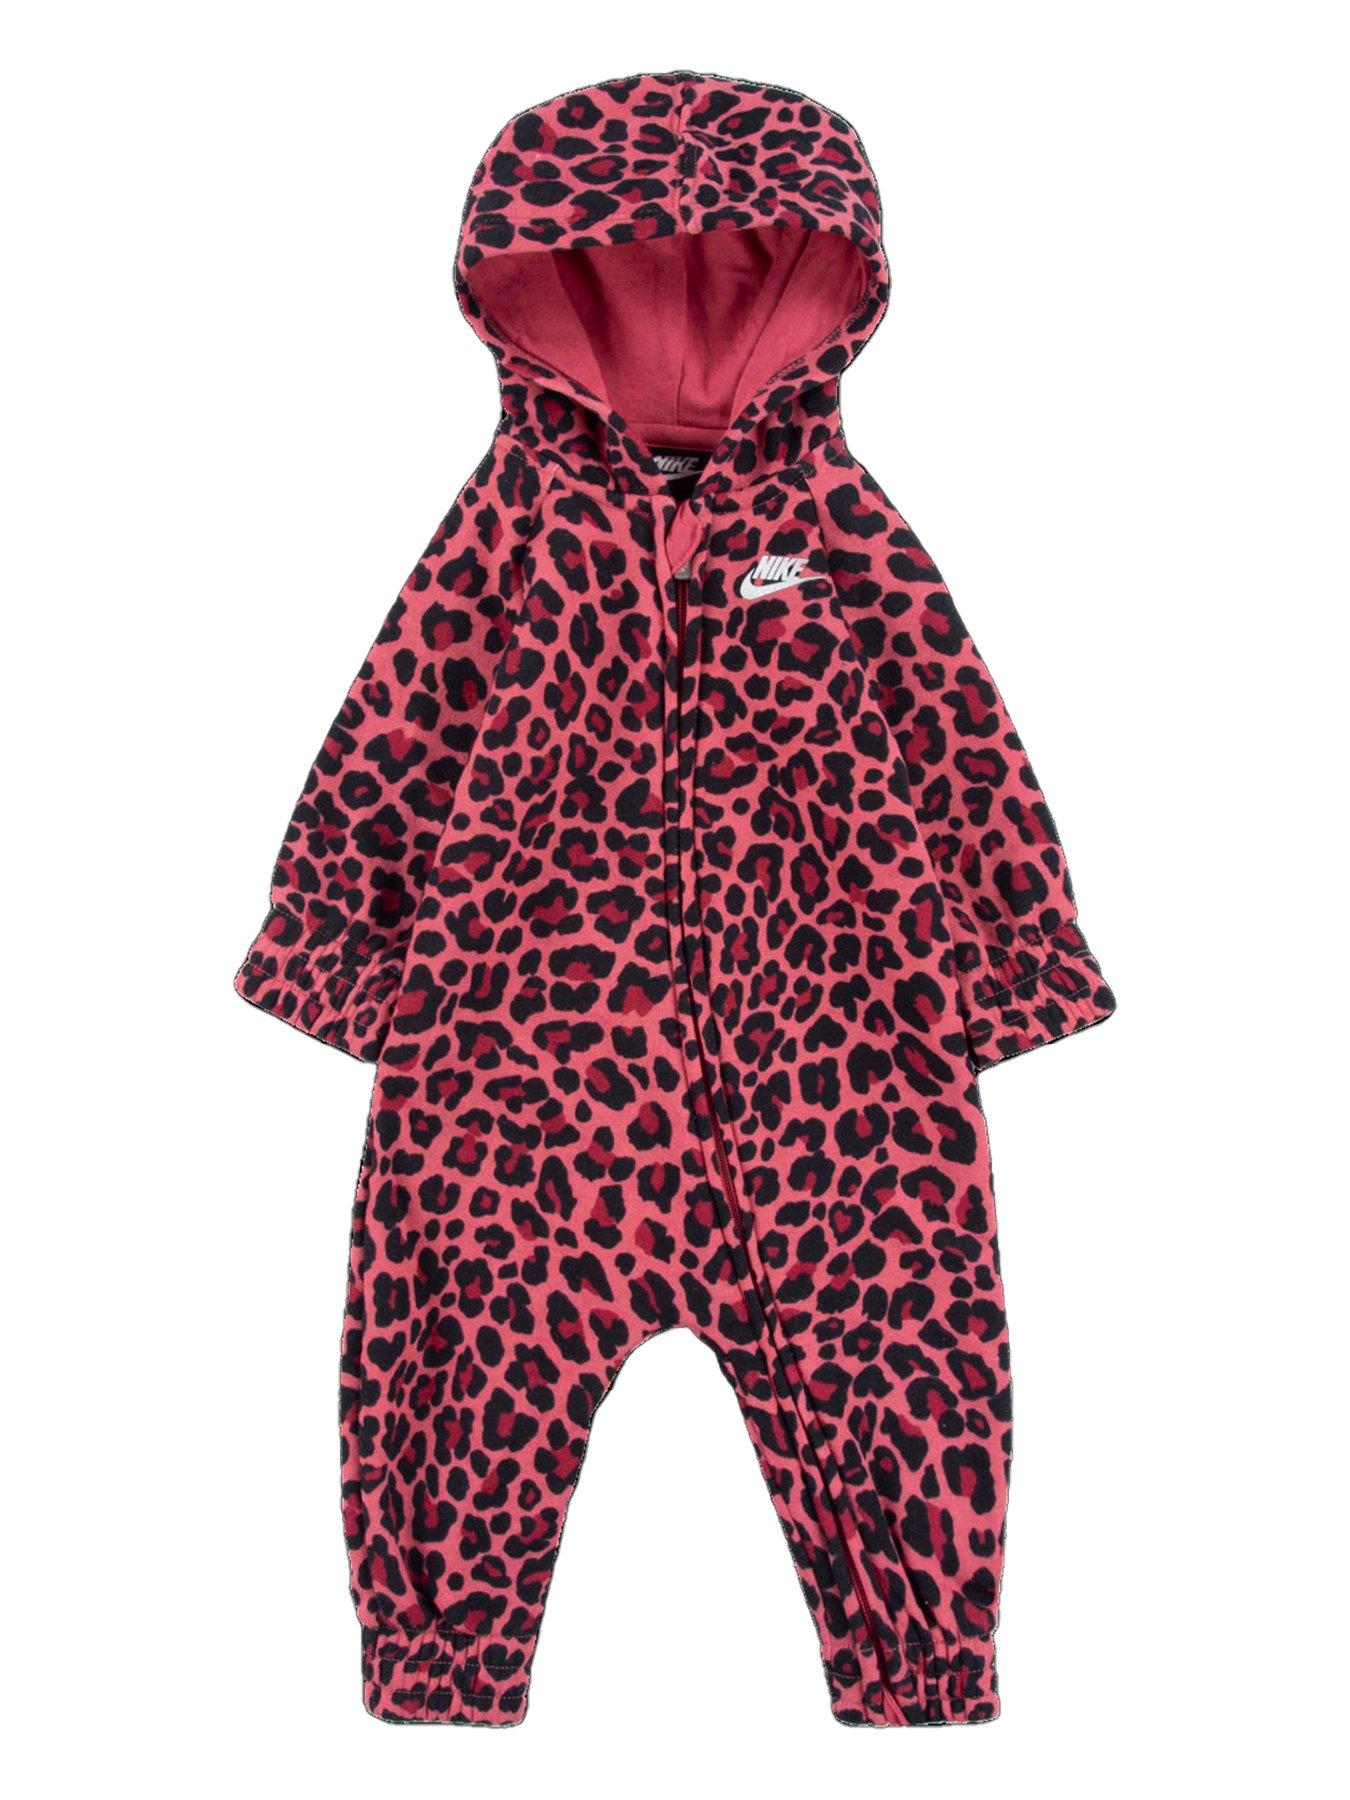 Kids Hooded Overall